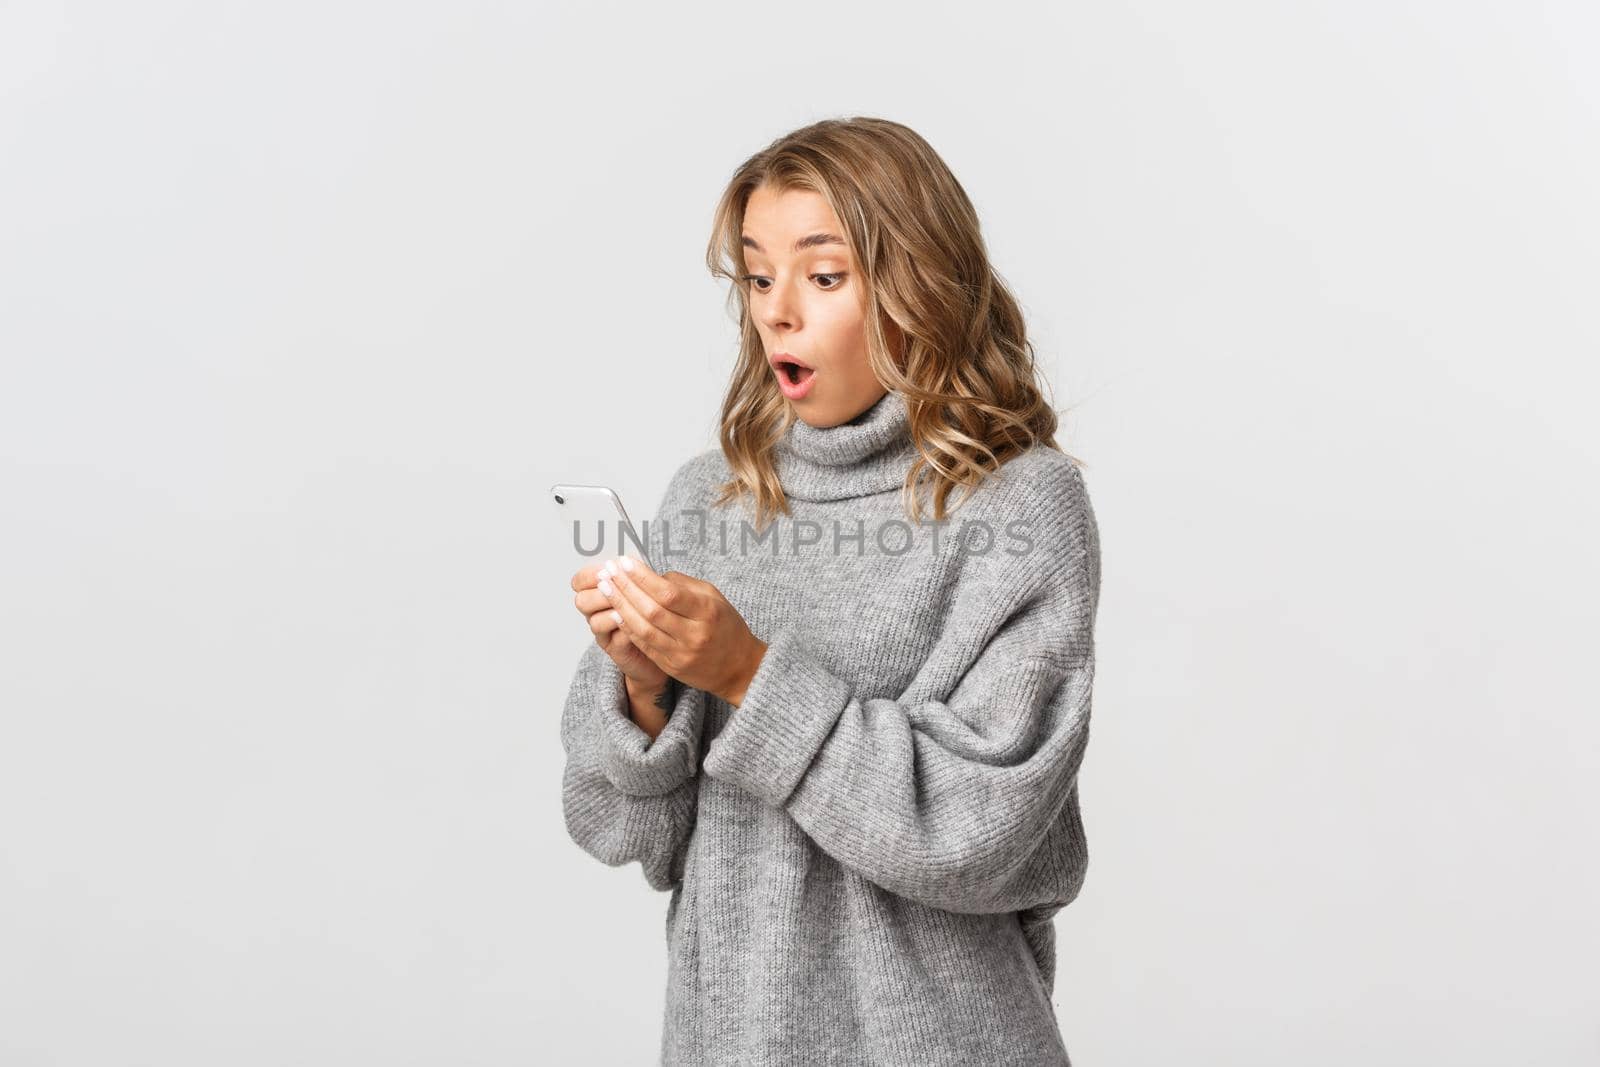 Portrait of amazed blond girl looking excited at smartphone screen, standing over white background. Concept of technology and communication.